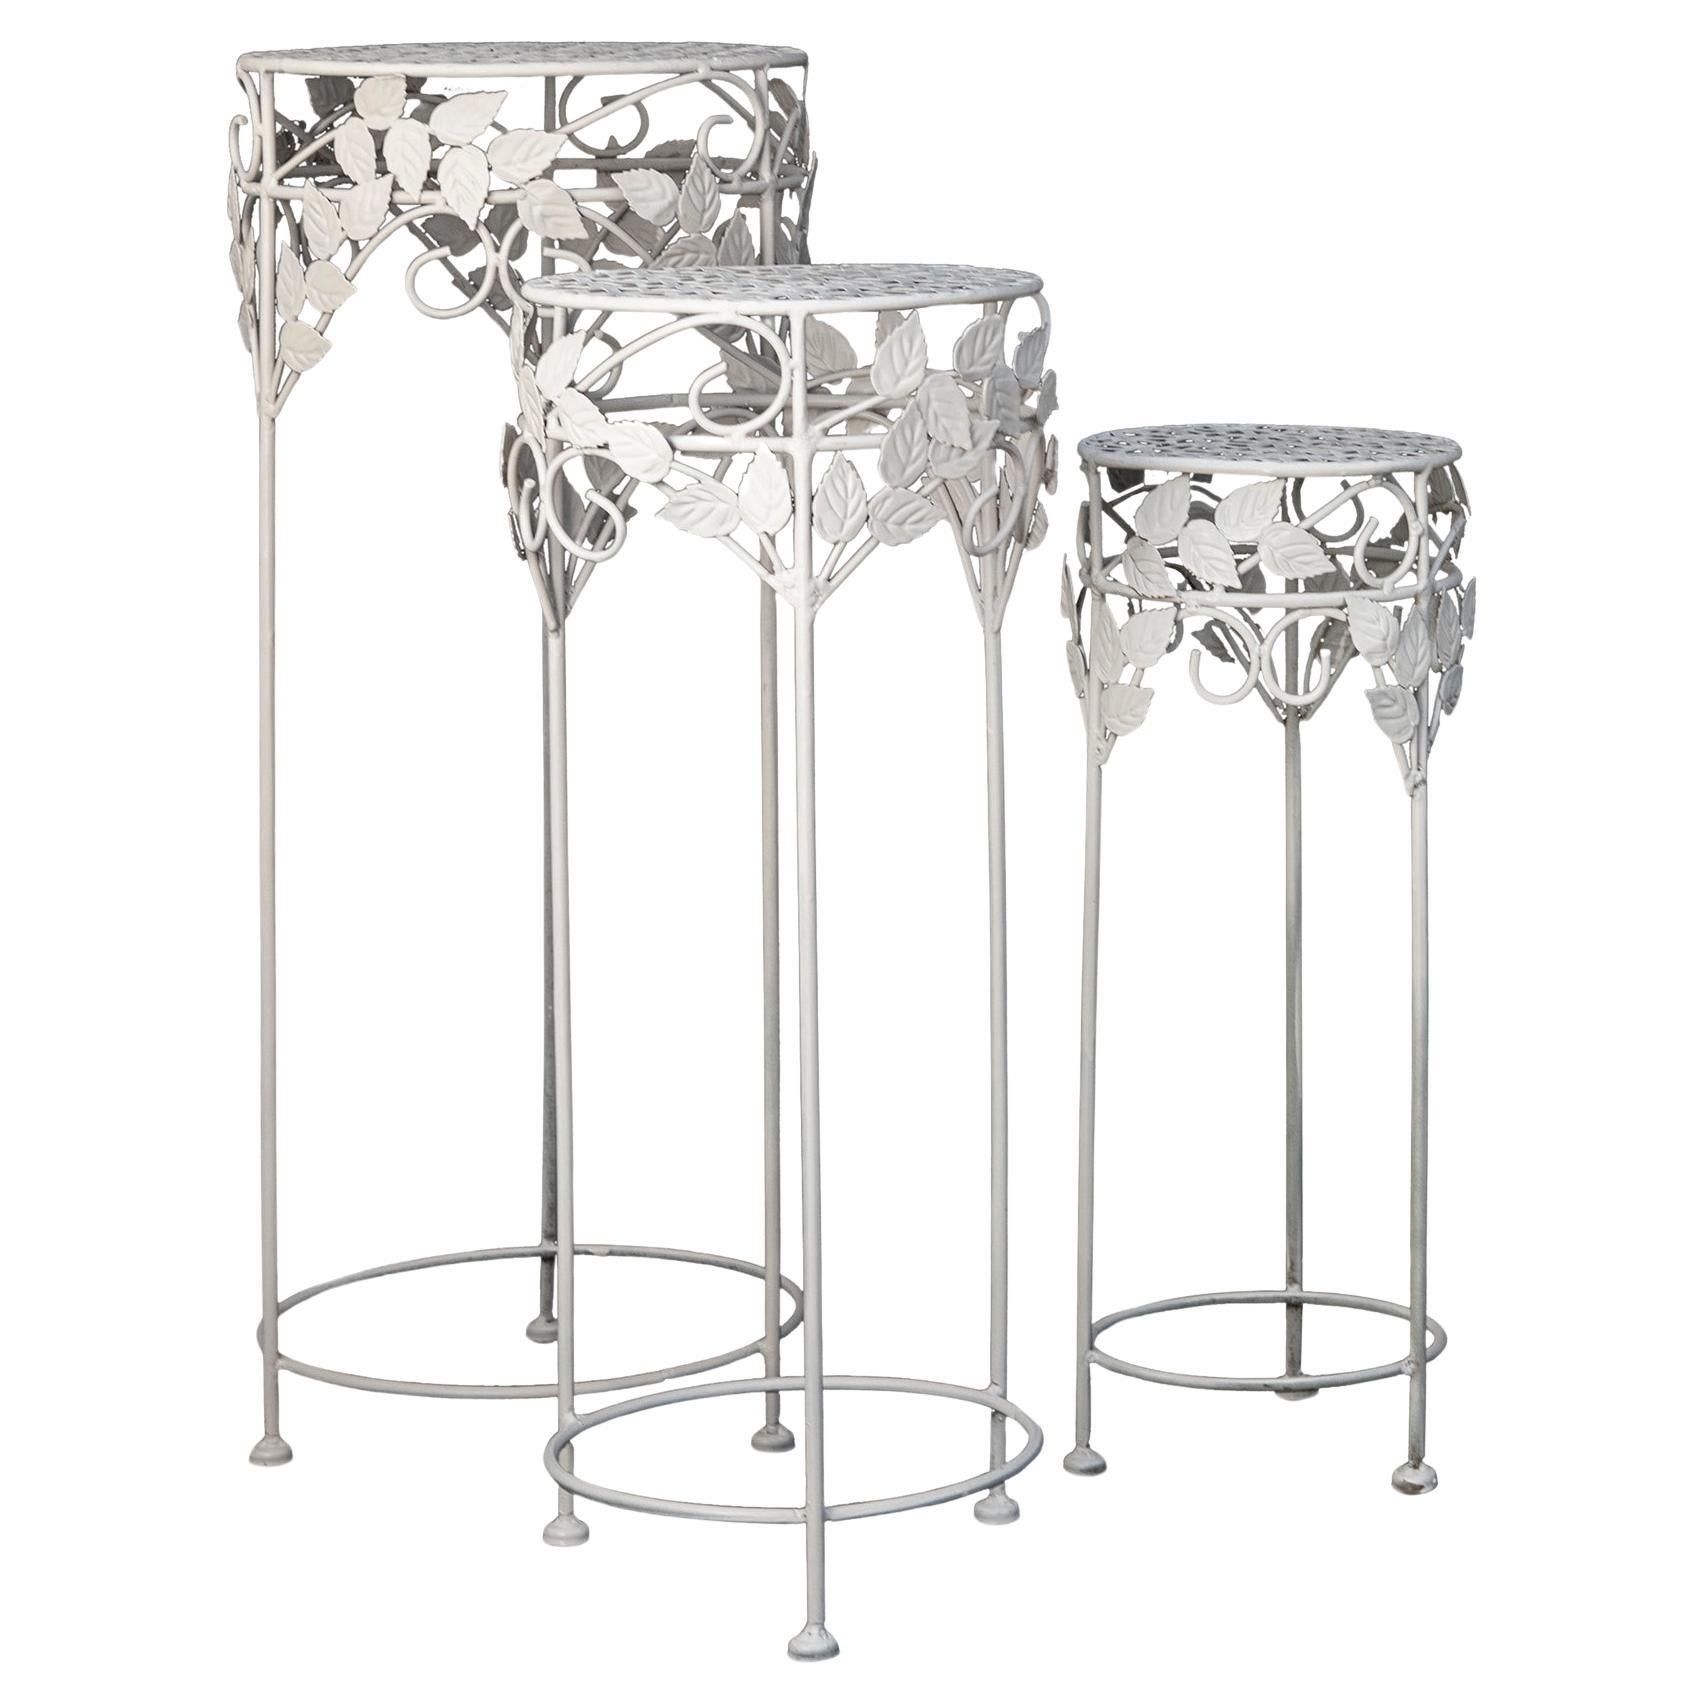 Charming set of plant stand made of iron & sheet metal.
Clusters of leaves decorate the stands. The tops of each stand have an open gridwork pattern. The stand can fit under the largest one perfectly.
They are sturdy yet delicate. The thin legs have